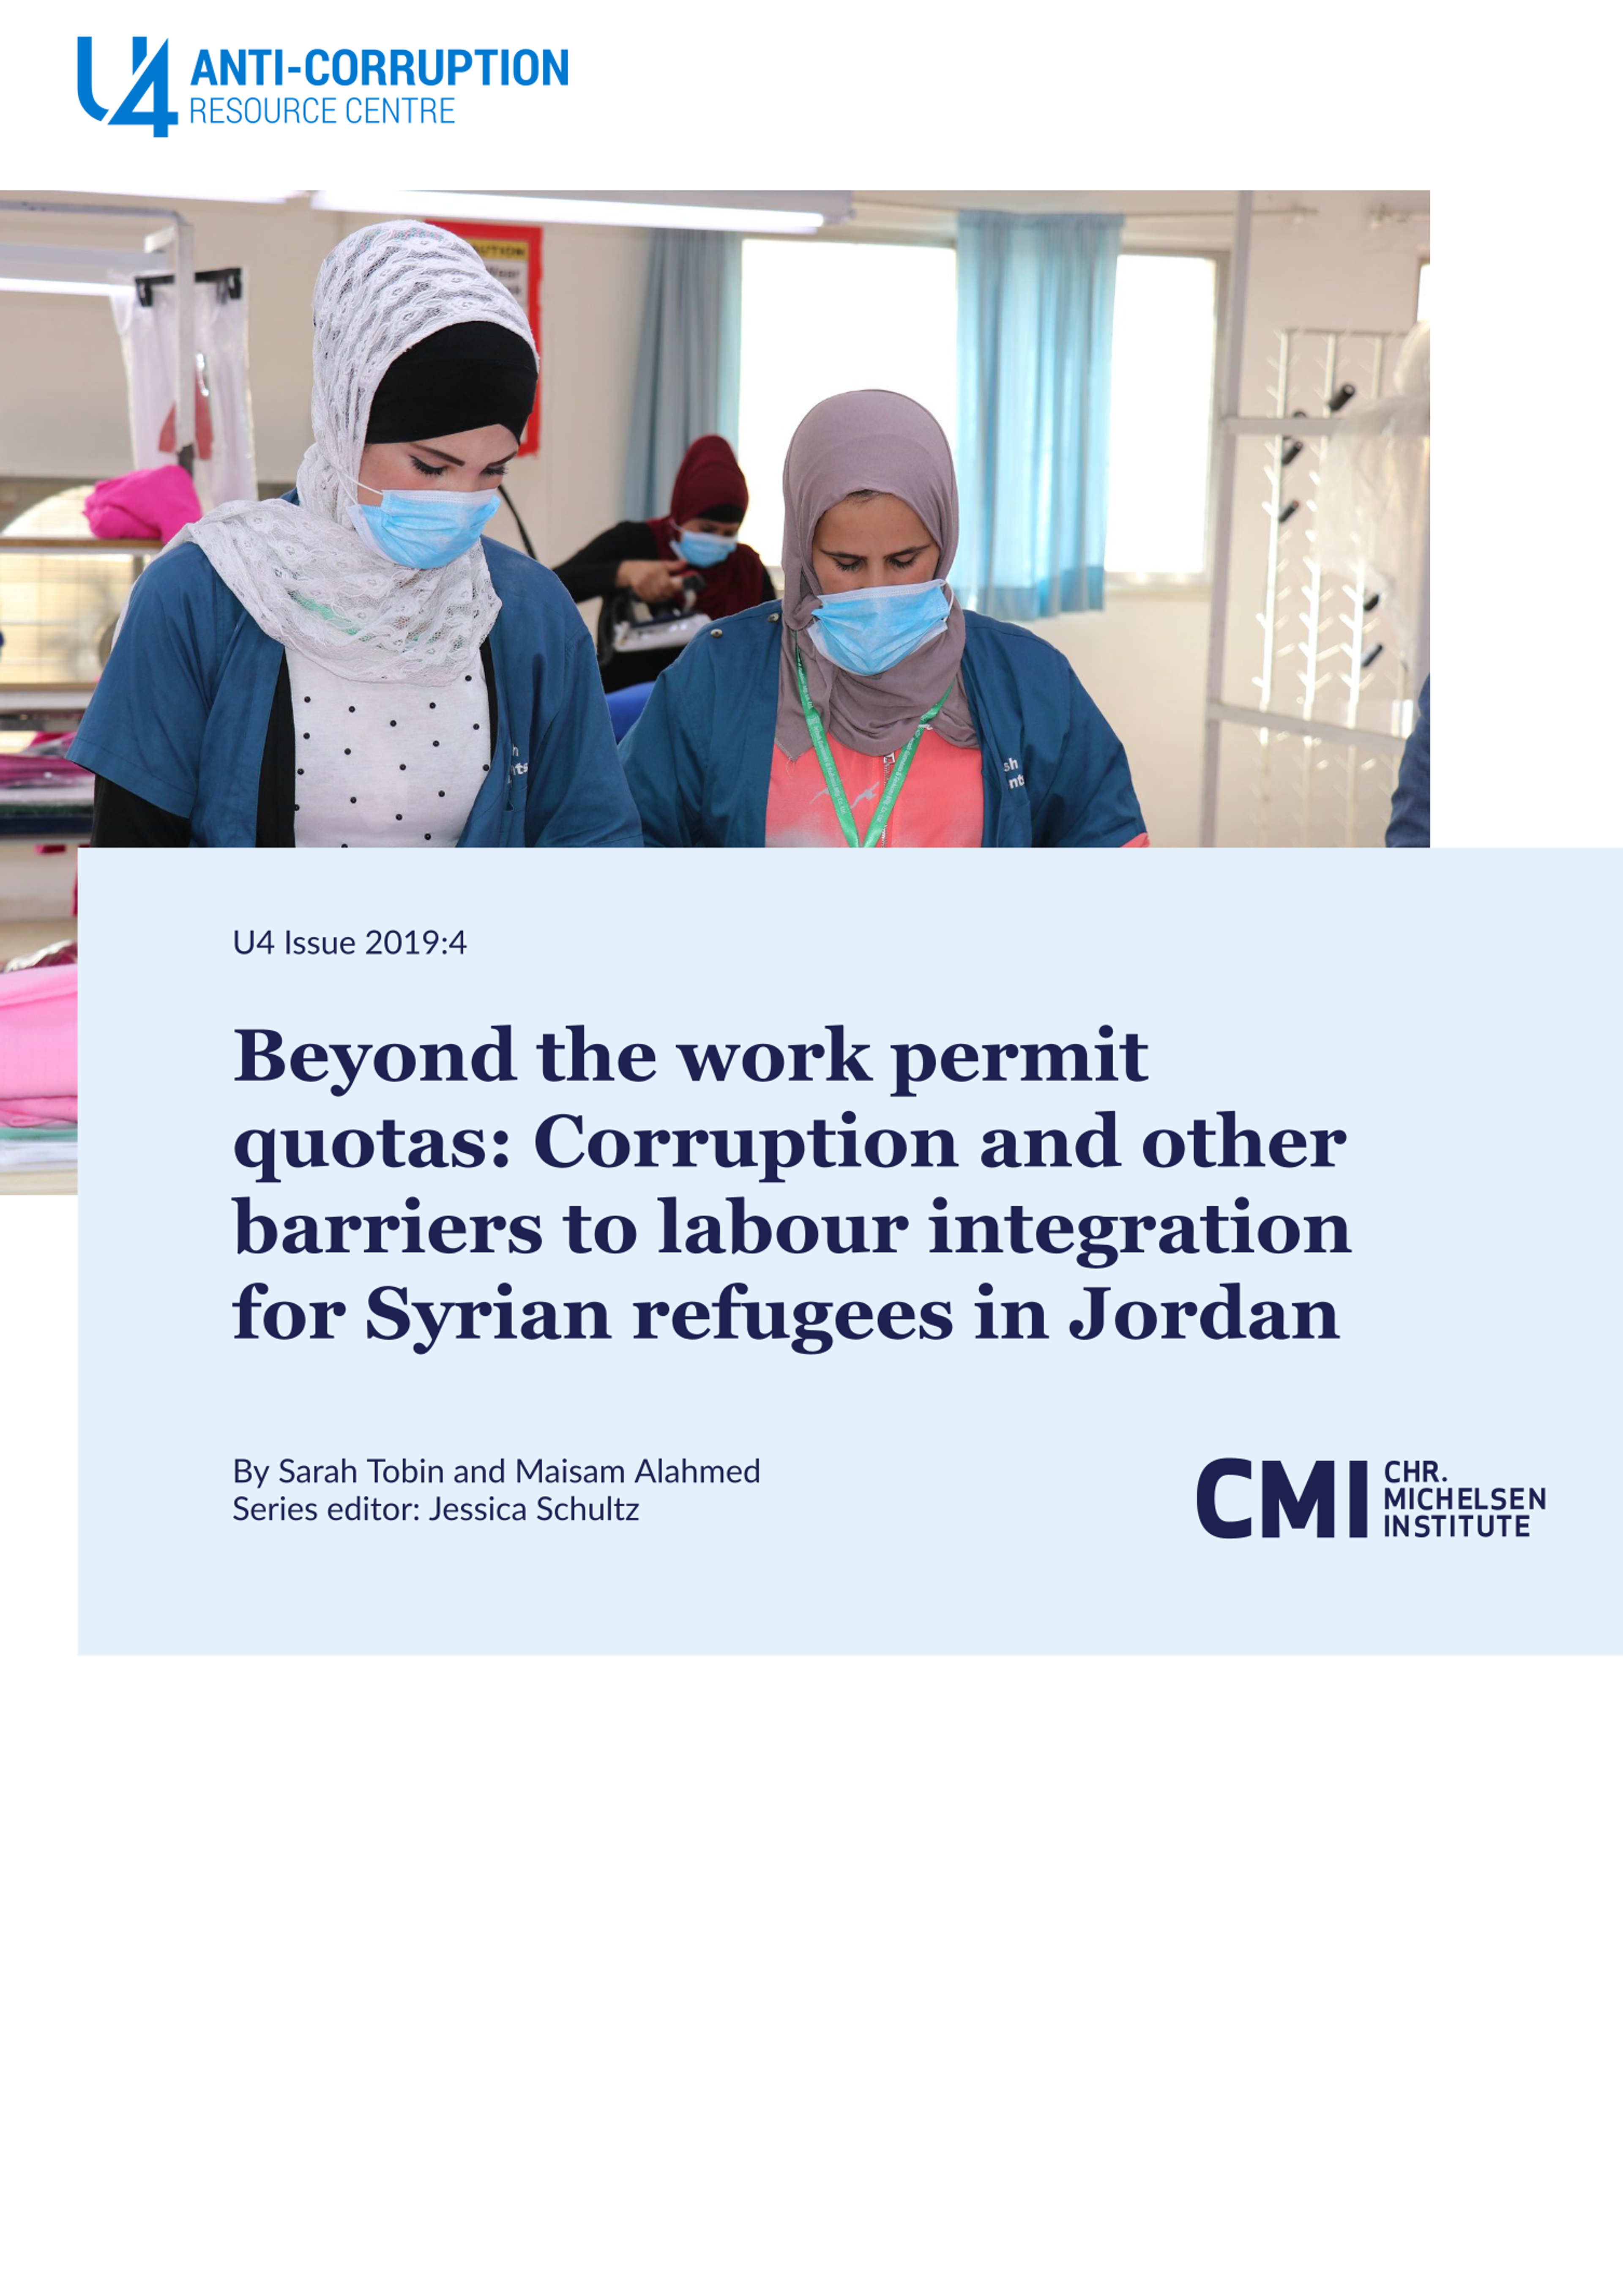 Beyond the work permit quotas: Corruption and other barriers to labour integration for Syrian refugees in Jordan